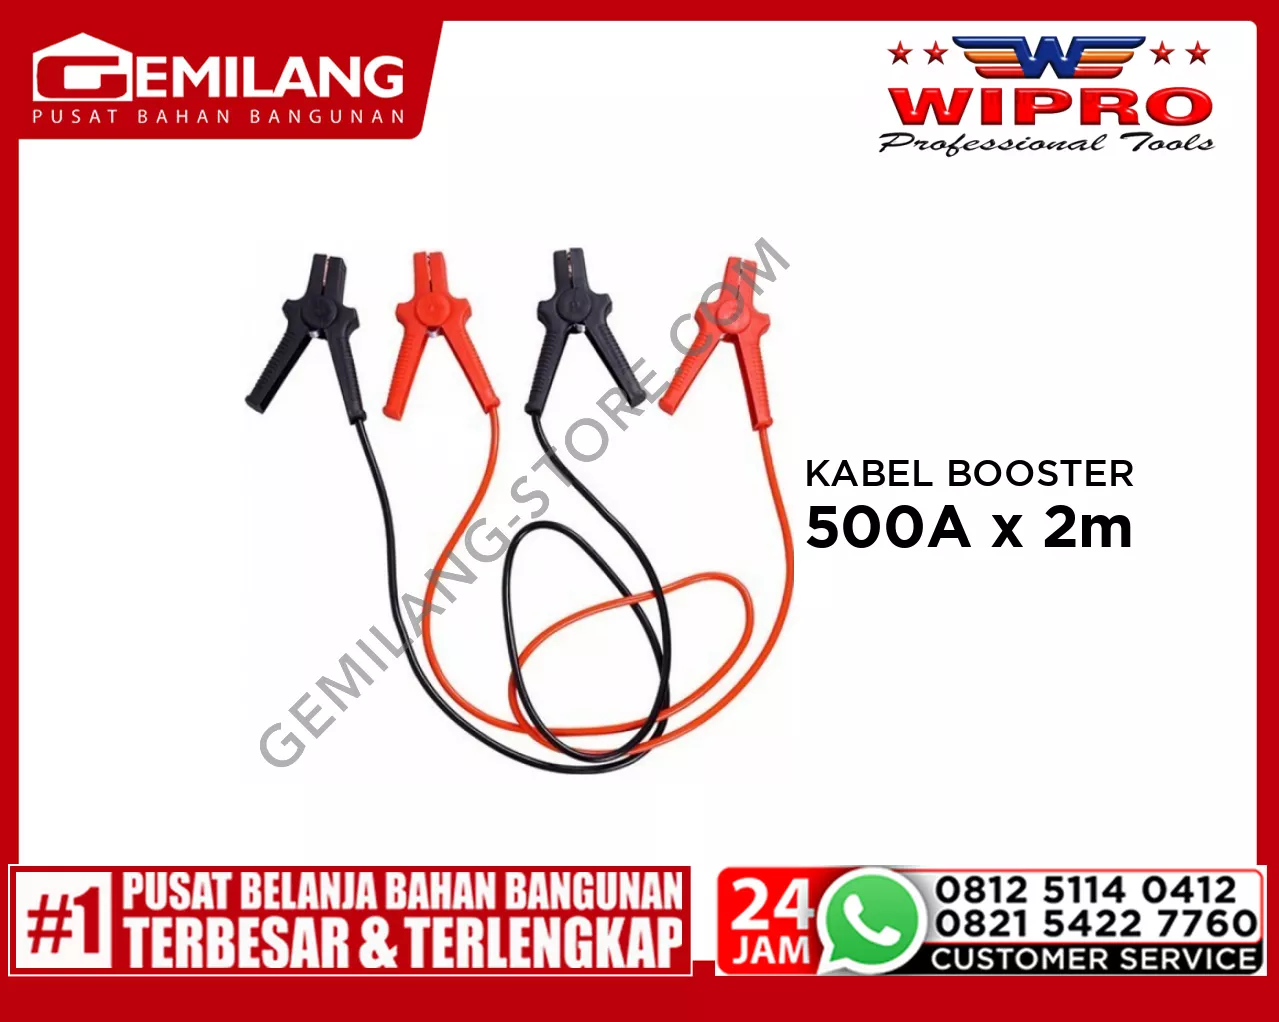 WIPRO KABEL BOOSTER 500A x 2m